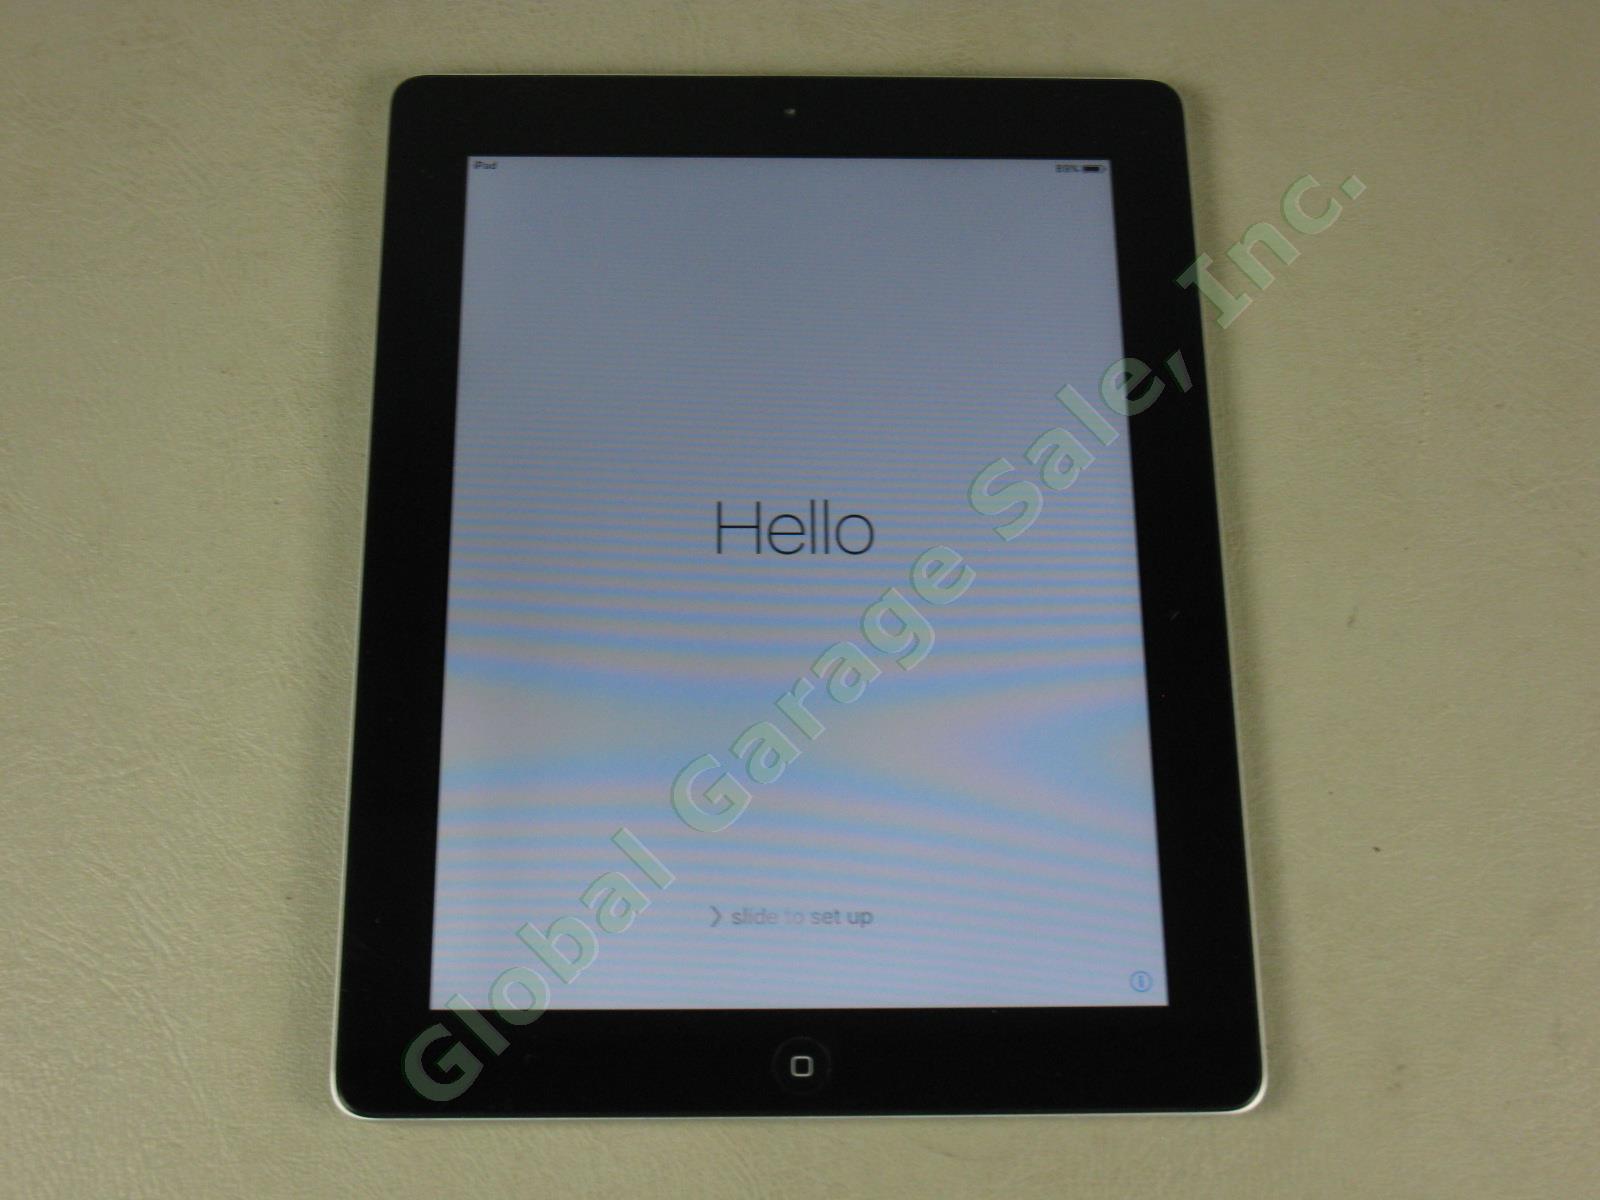 Apple iPad 2 Black Tablet 16GB Wifi Works Great MC770LL/A A1395 NO RESERVE PRICE